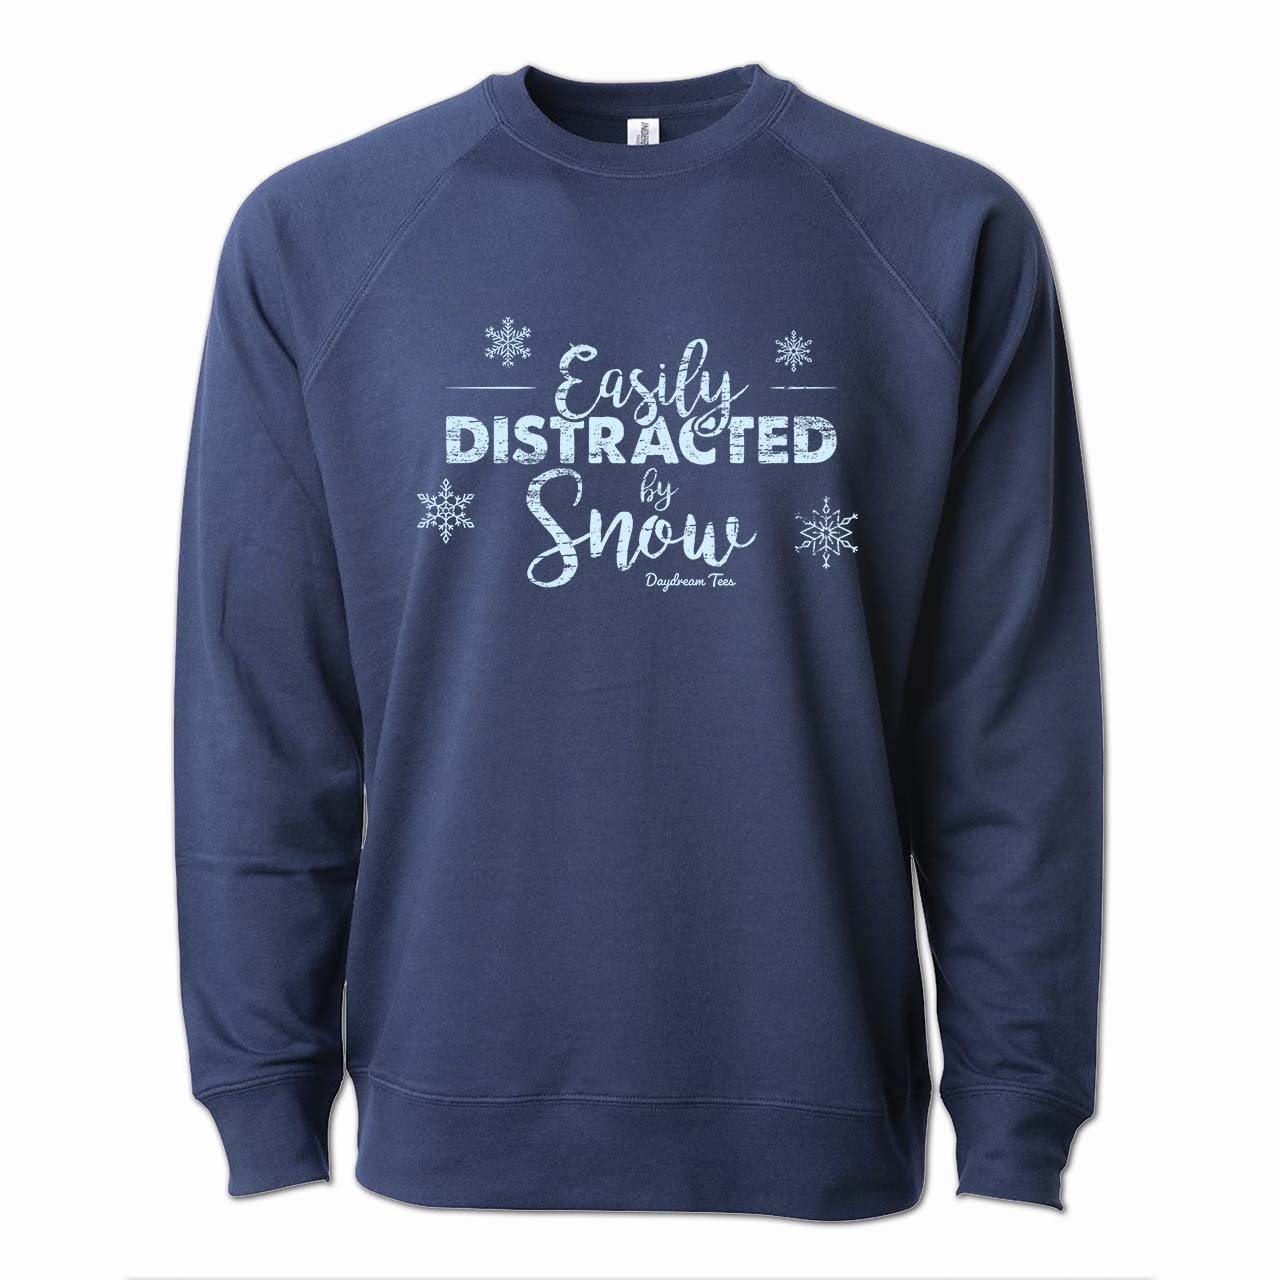 Daydream Tees Easily Distracted by Snow Crewneck